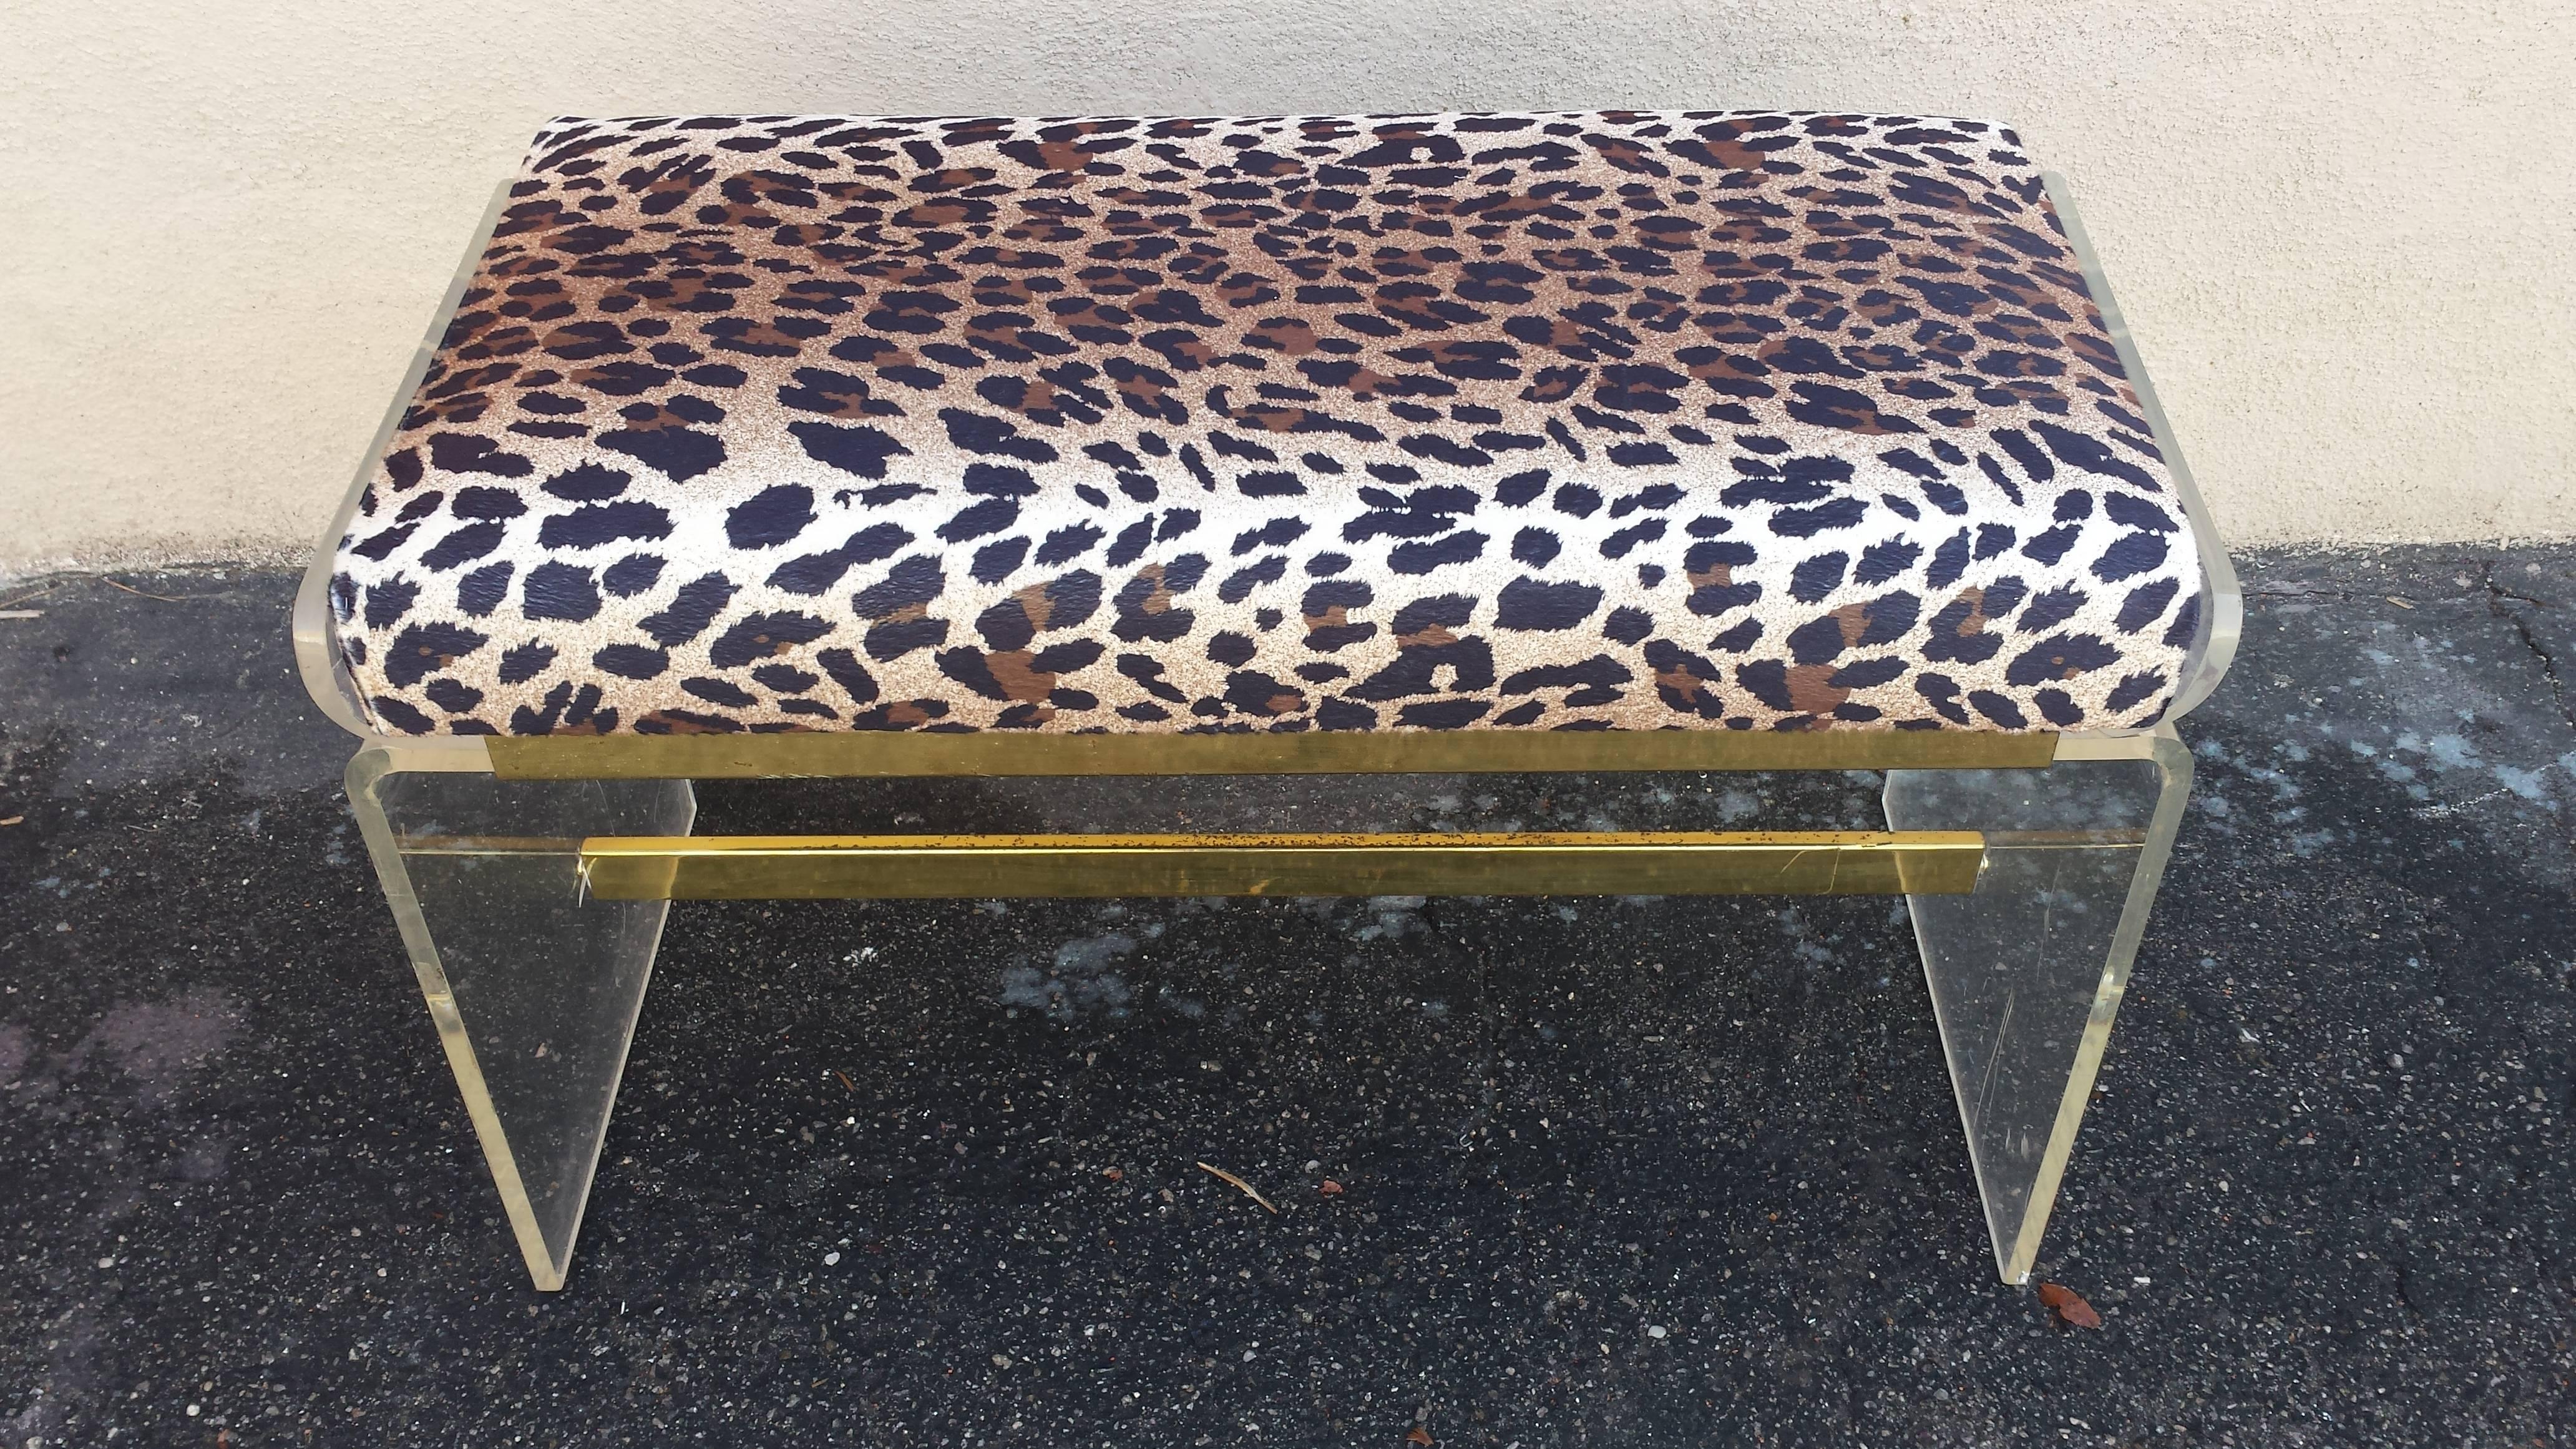 Mid-Century Lucite bench in original condition. Seat is new upholstered in leopard fabric. Dimensions: L 30